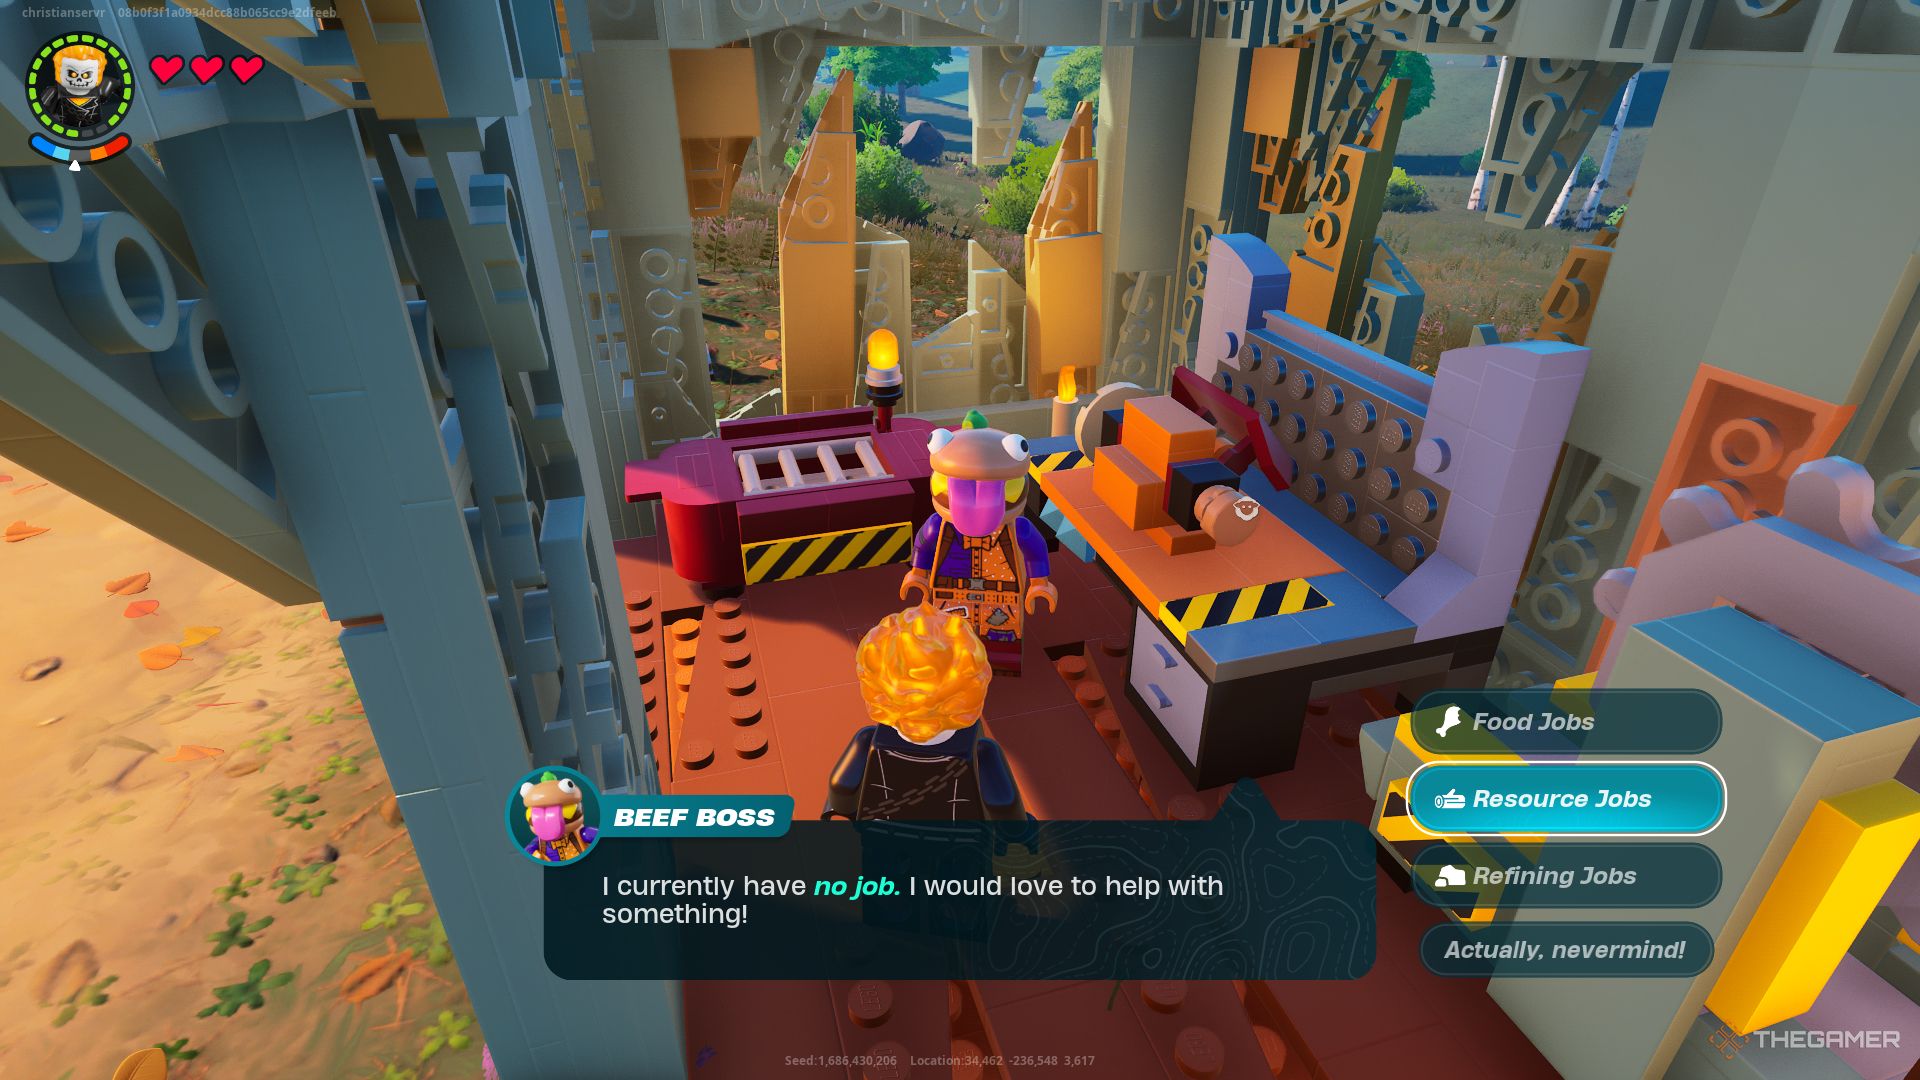 A screenshot from Lego Fortnite with the Ghost Rider figure talking to Beef Boss while the 'Resource Jobs' option is selected.